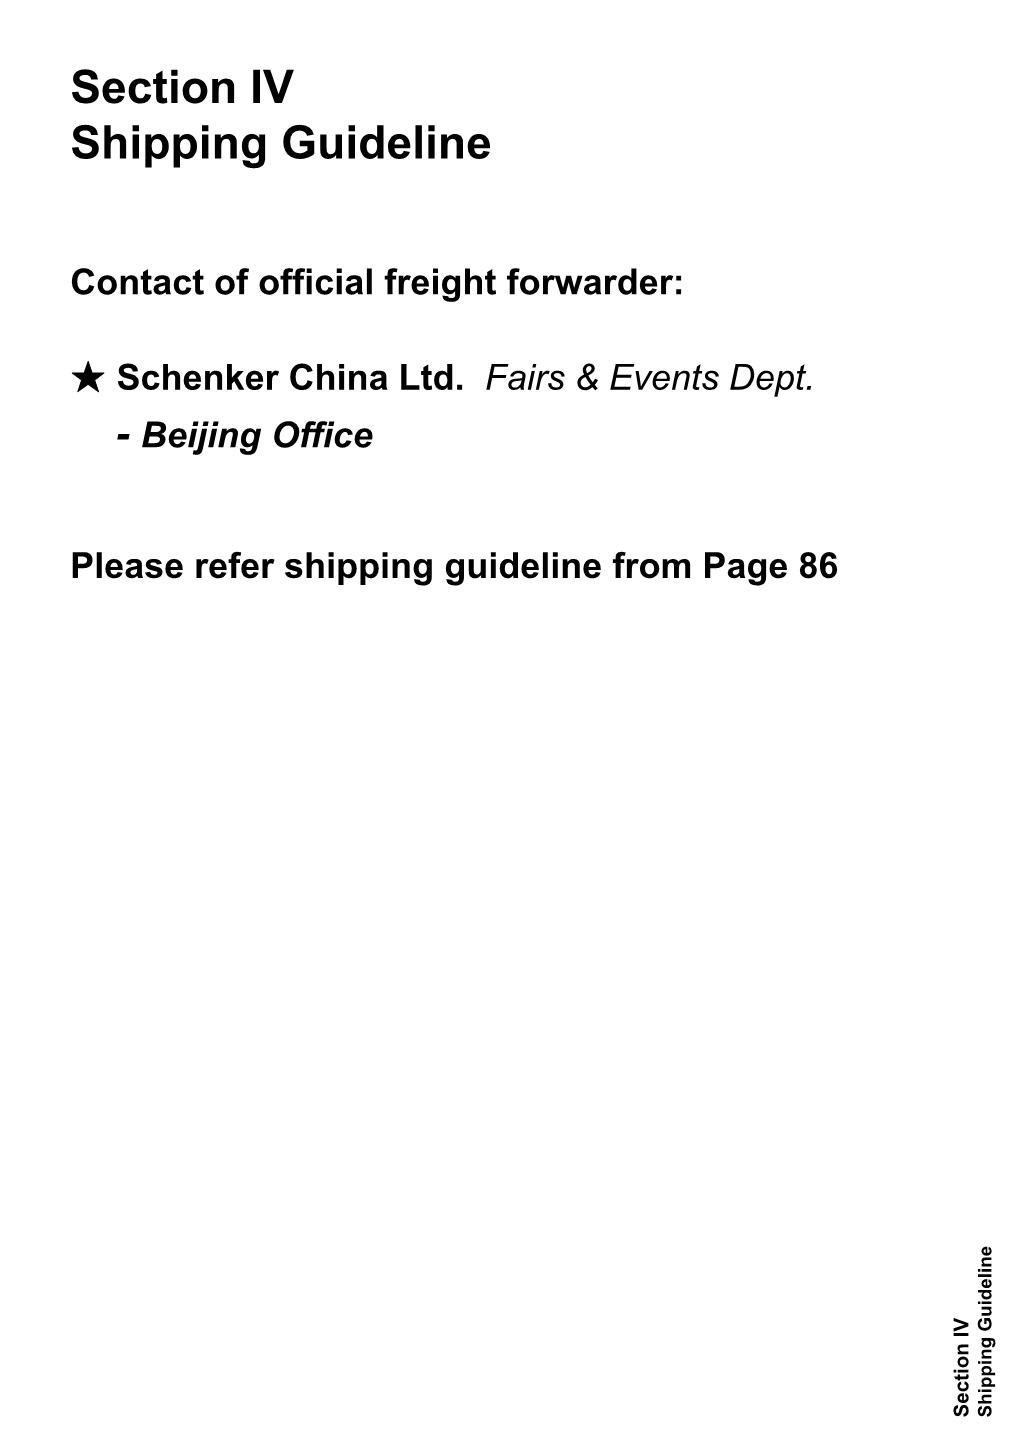 Section IV Shipping Guideline